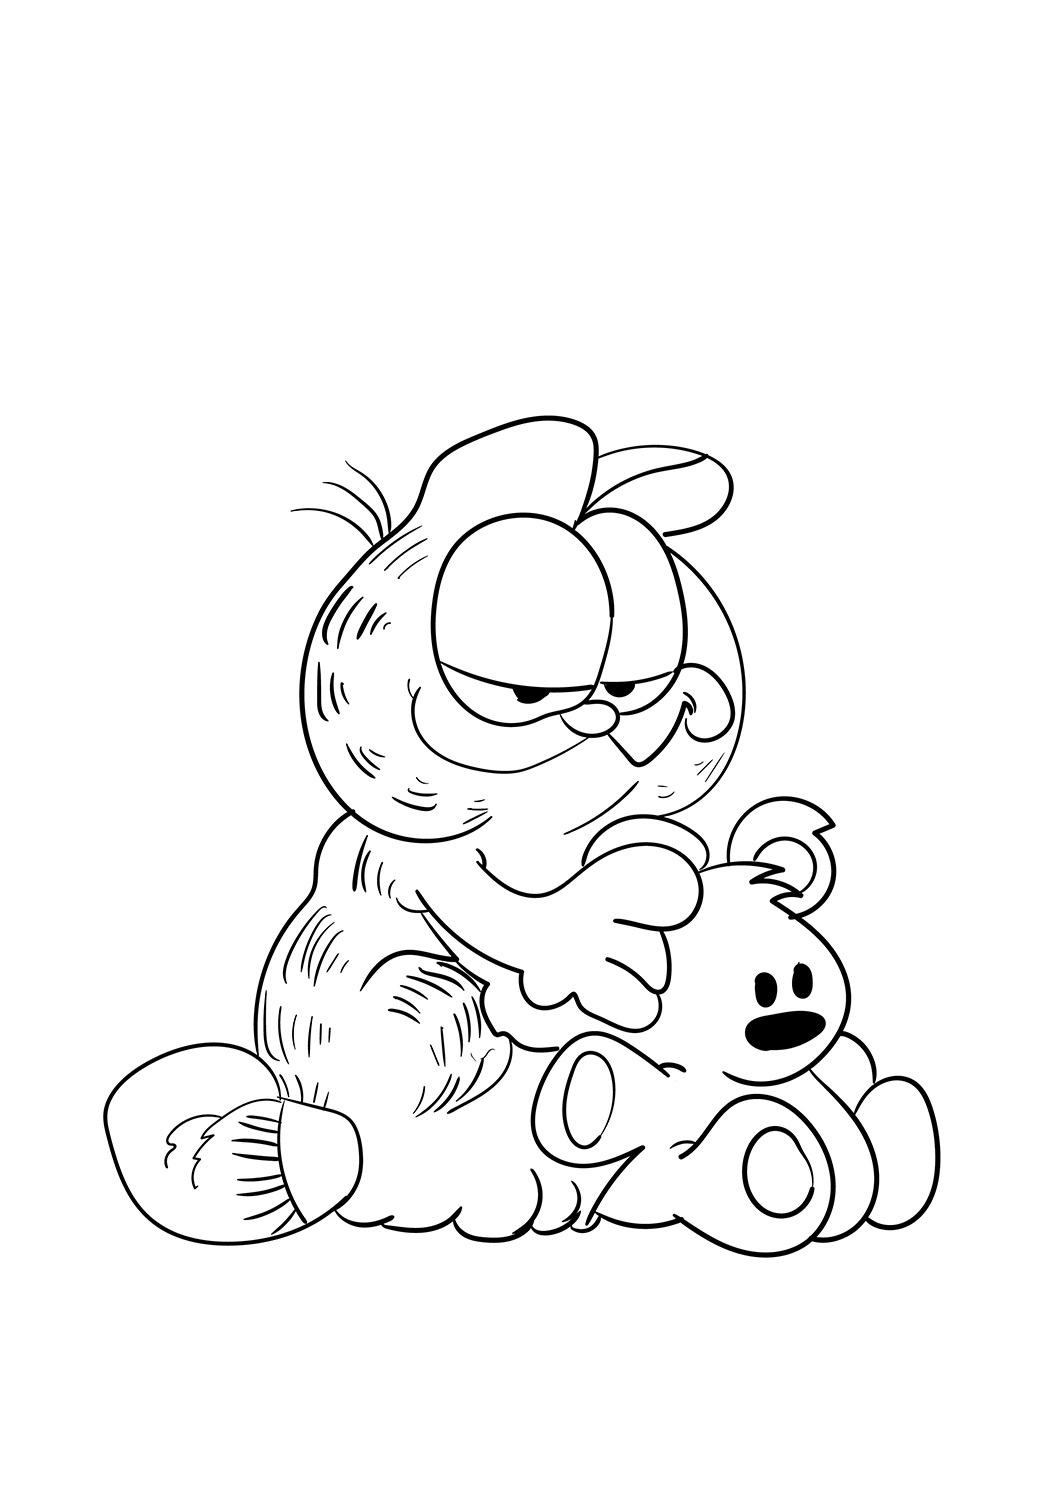 Garfield and Odie Coloring Pages